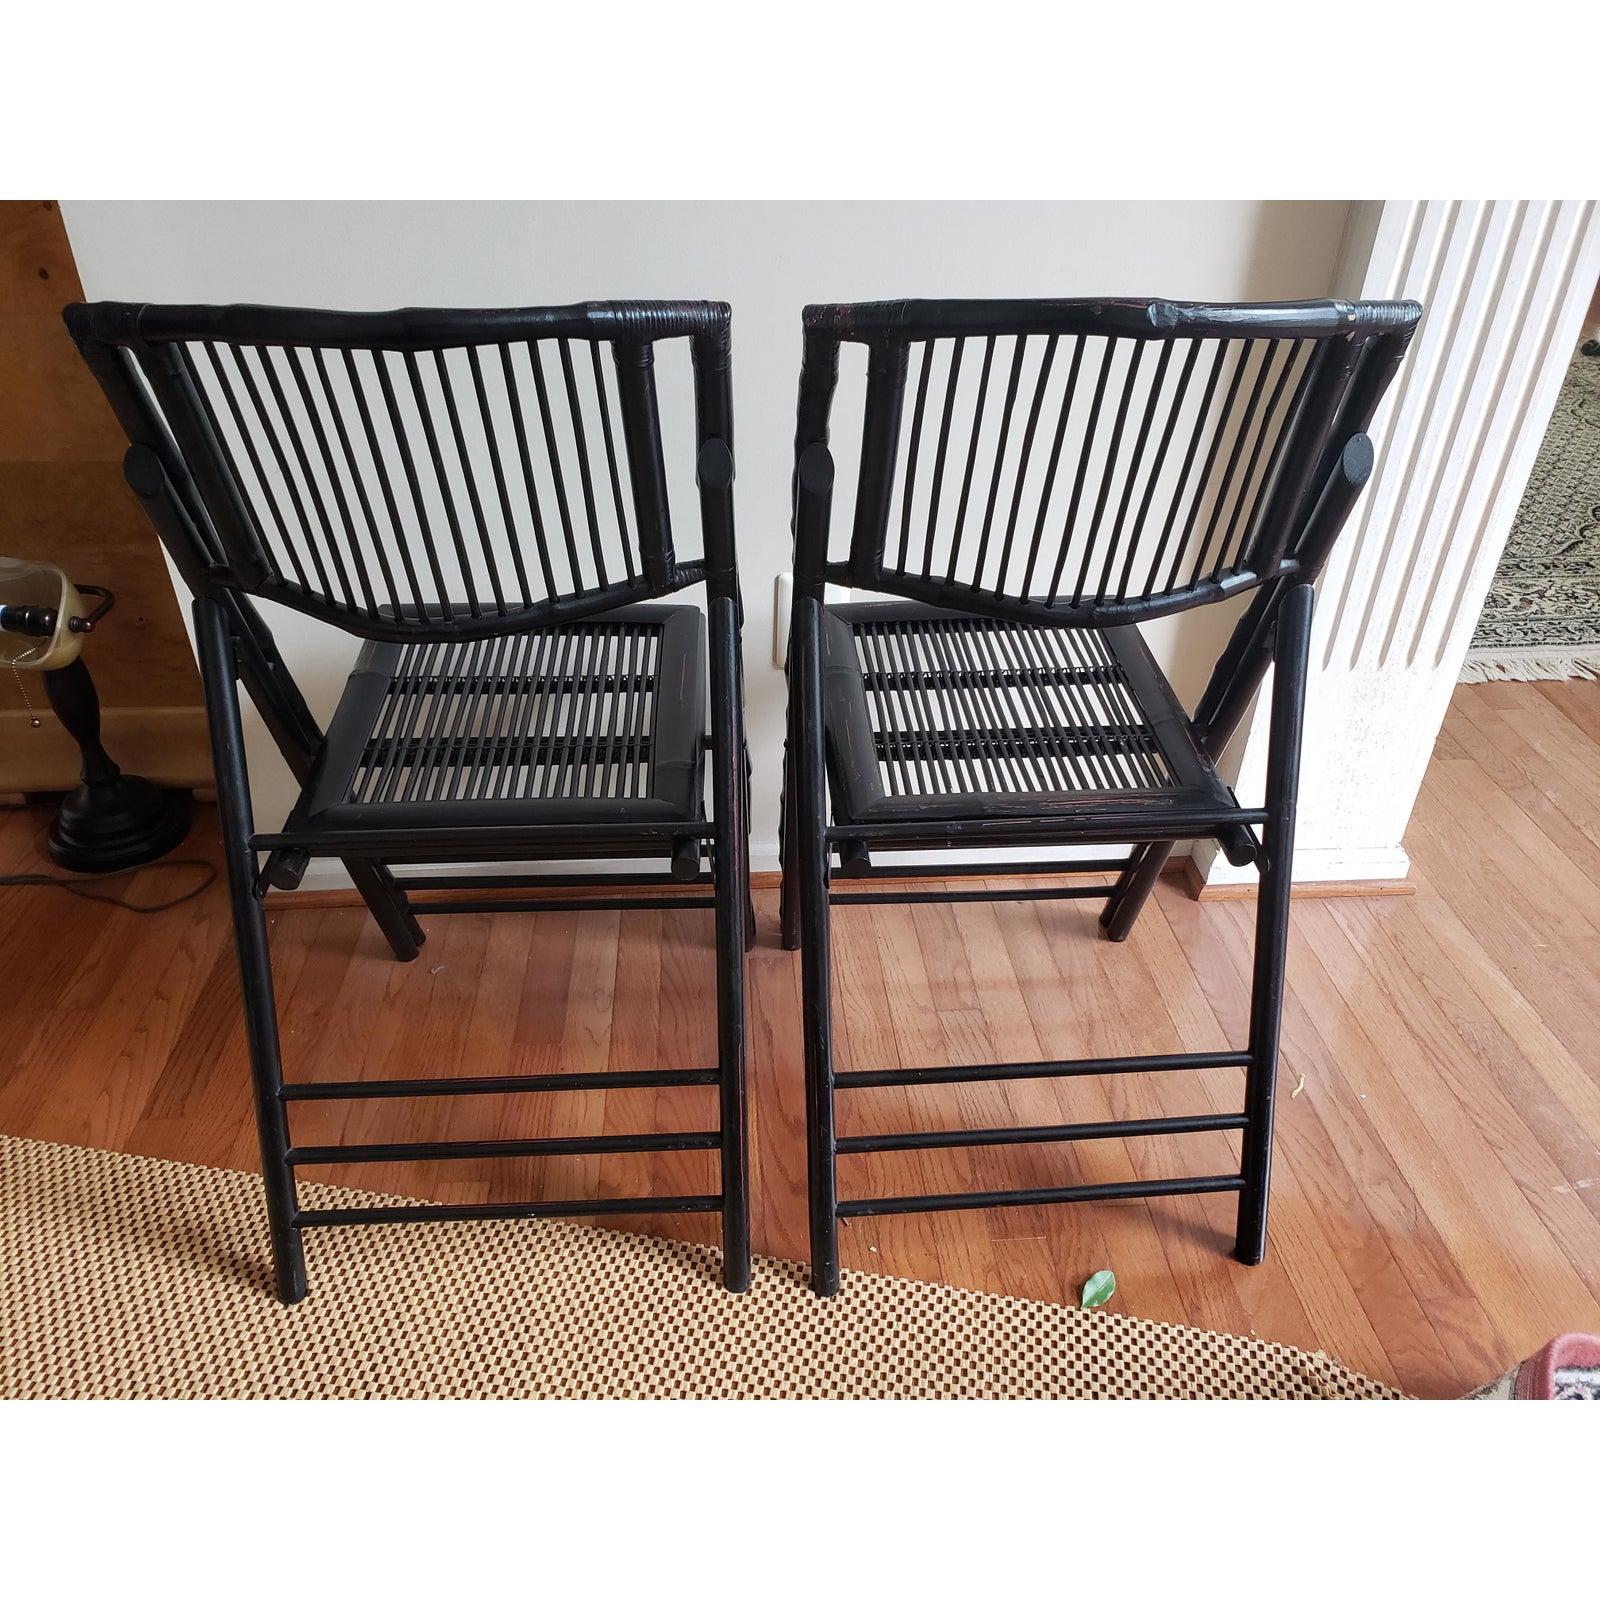 A pair of 1970s tortoise bamboo folding chairs in black. Good vintage condition. Measure 18